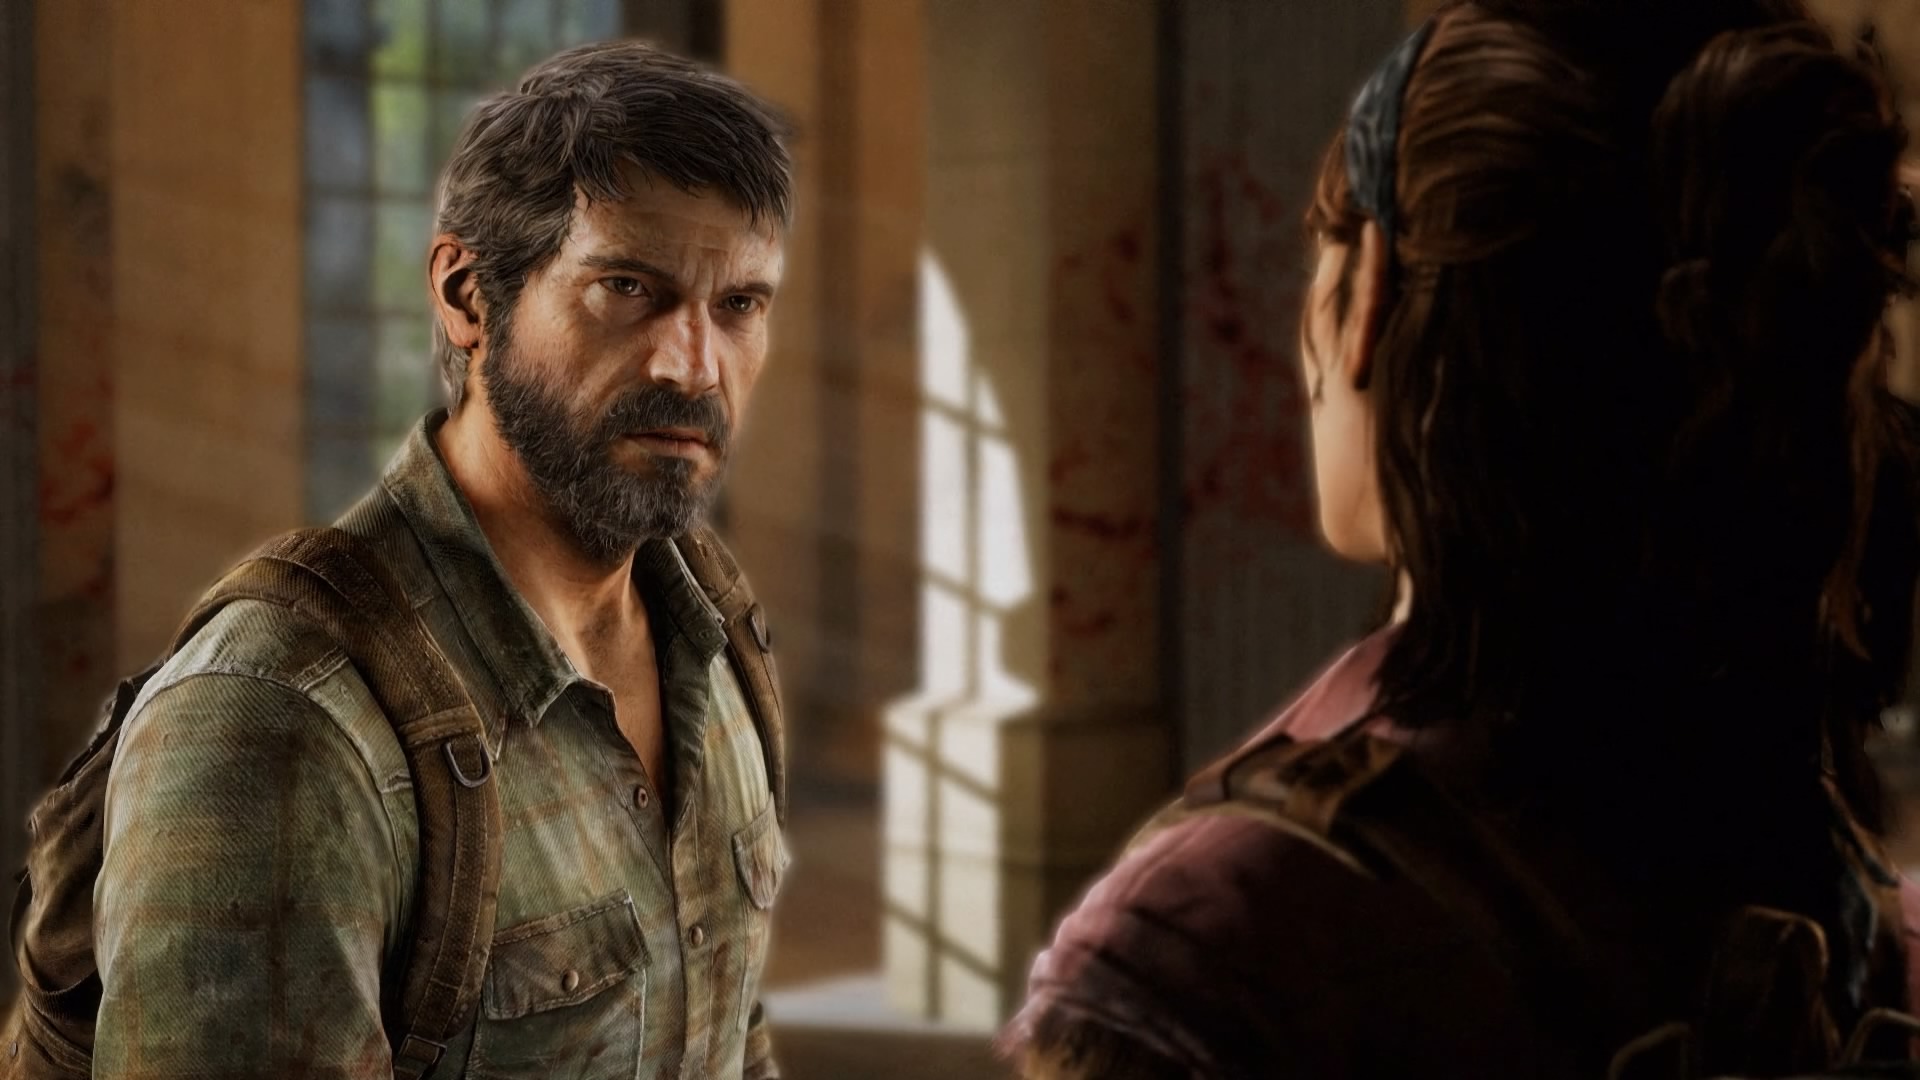 how old is joel the last of us